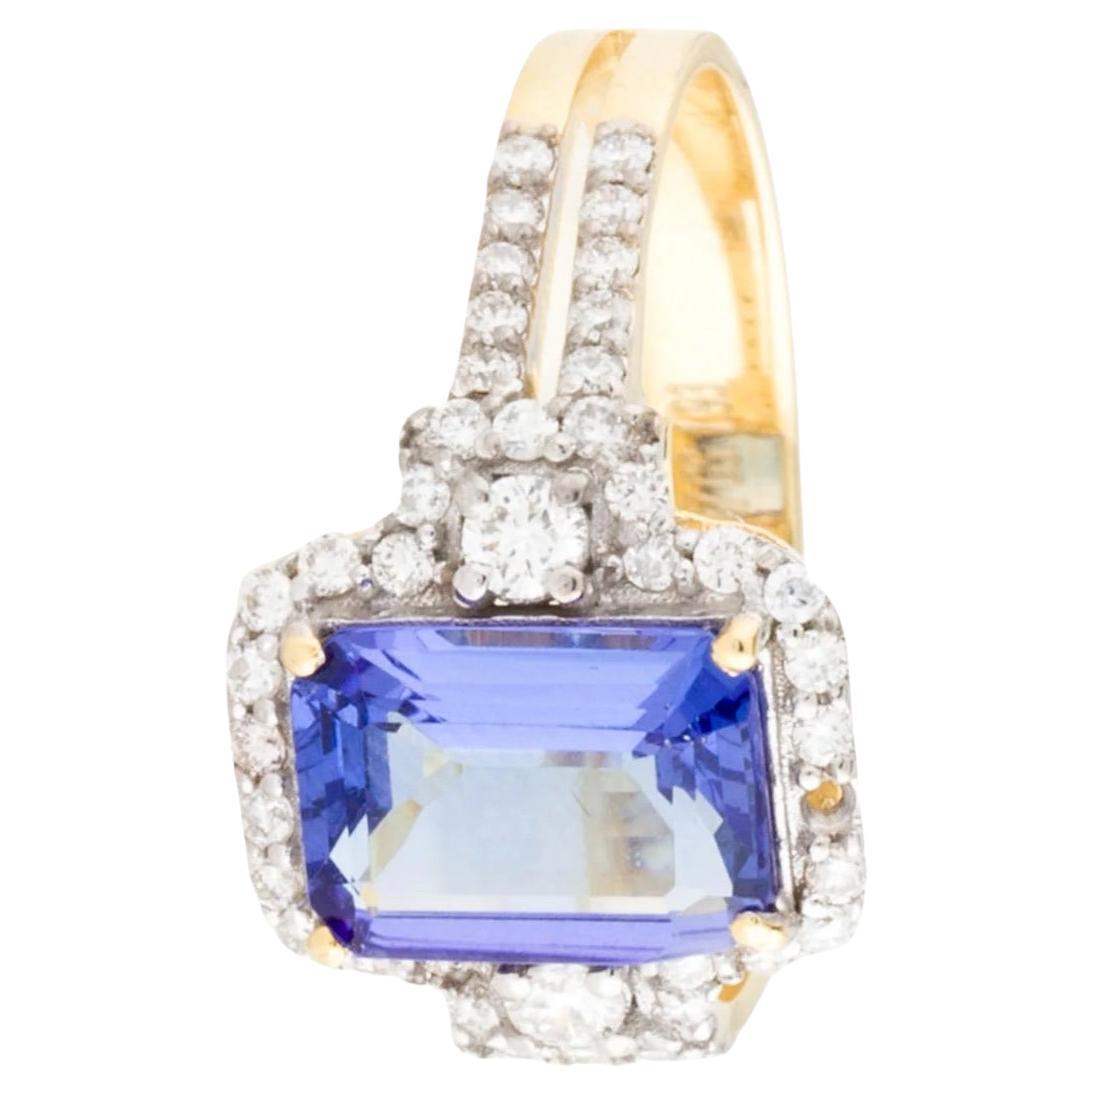 Elevate your ensemble with this exquisite 14K yellow gold cocktail ring, boasting a stunning 1.77 carat emerald cut tanzanite as its centerpiece, exuding a mesmerizing violet hue. Surrounding it are 51 round brilliant diamonds totaling 0.37 carats,